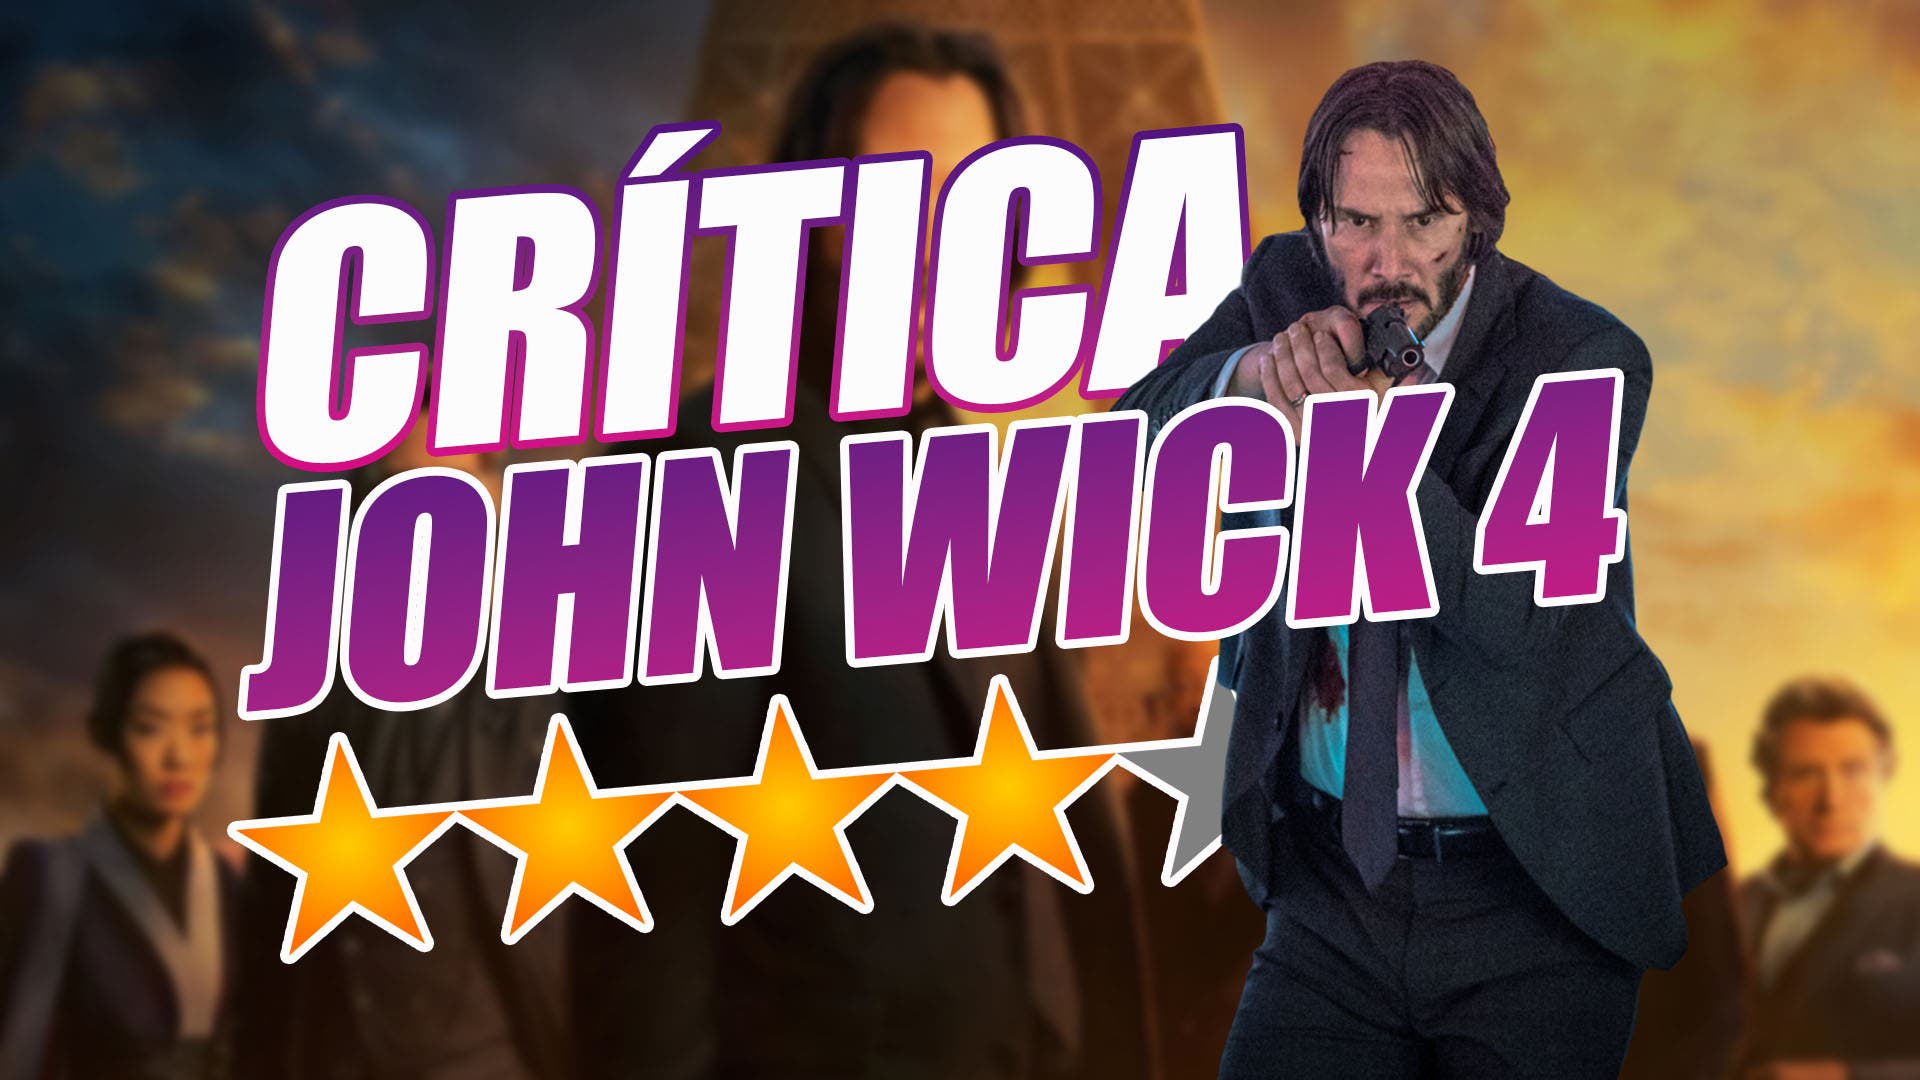 John Wick 4 Review: Best Action Movie of the Year